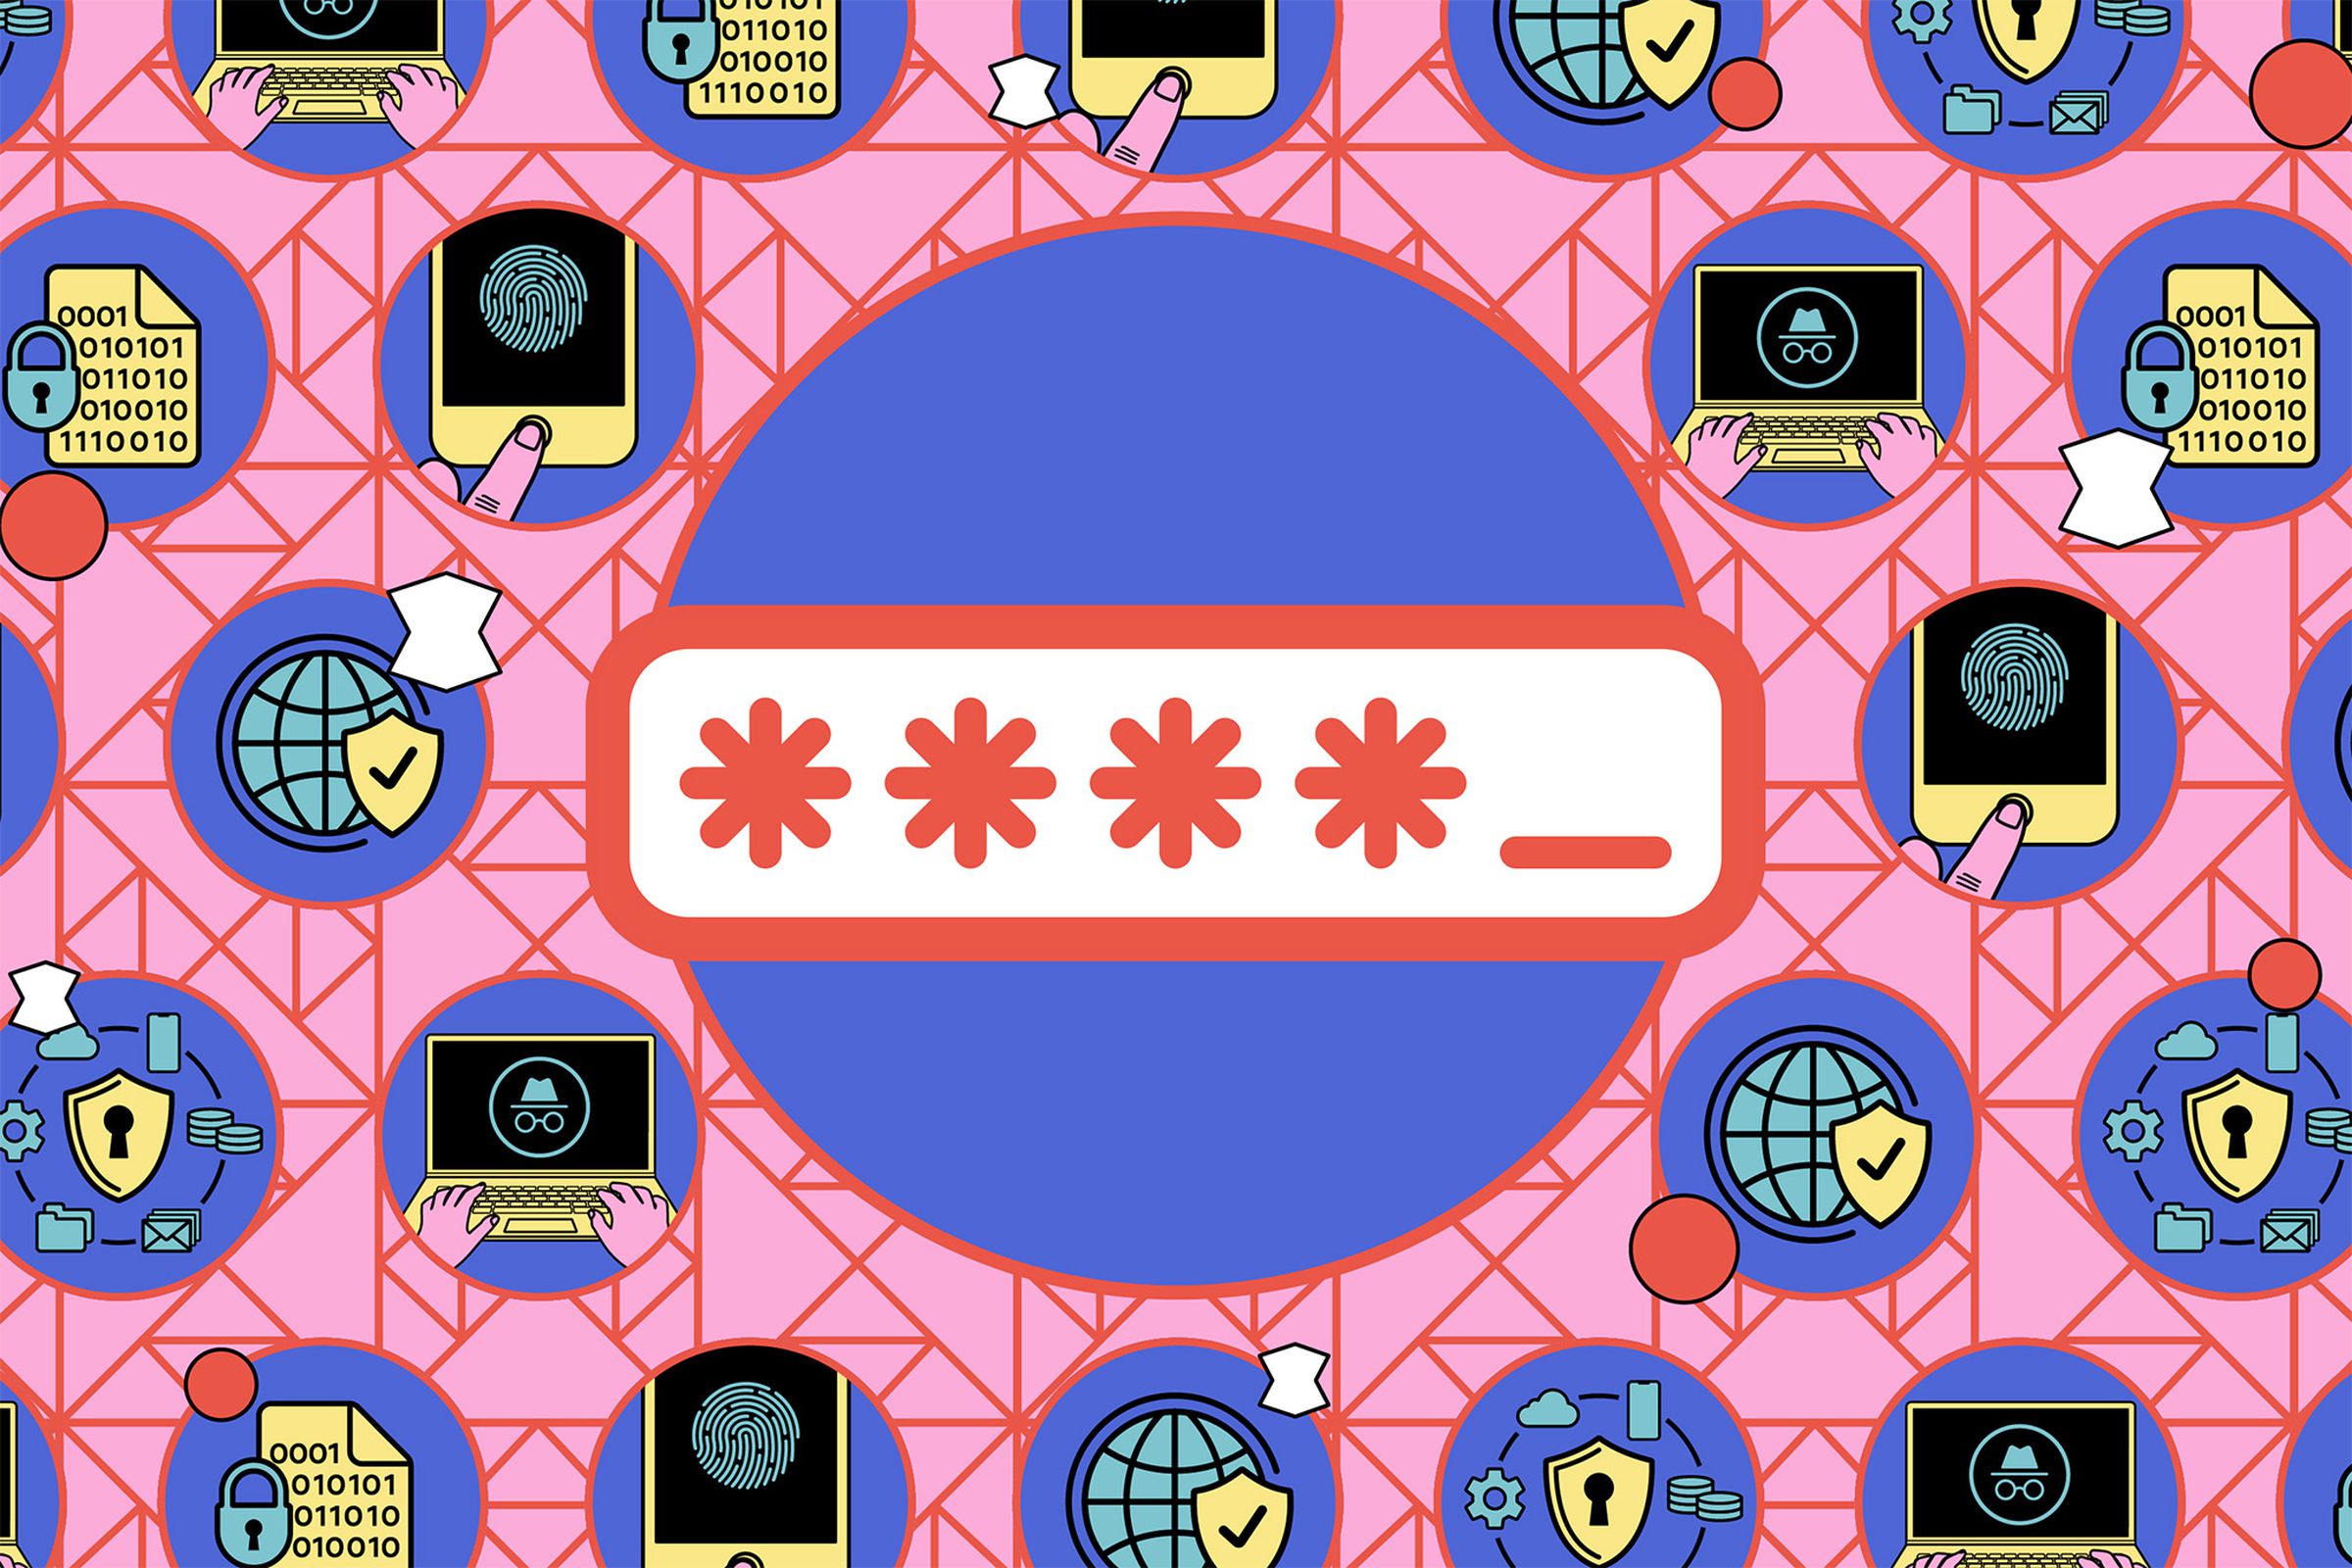 Line with three stars (as in a password) against a pink background with small illustrations.